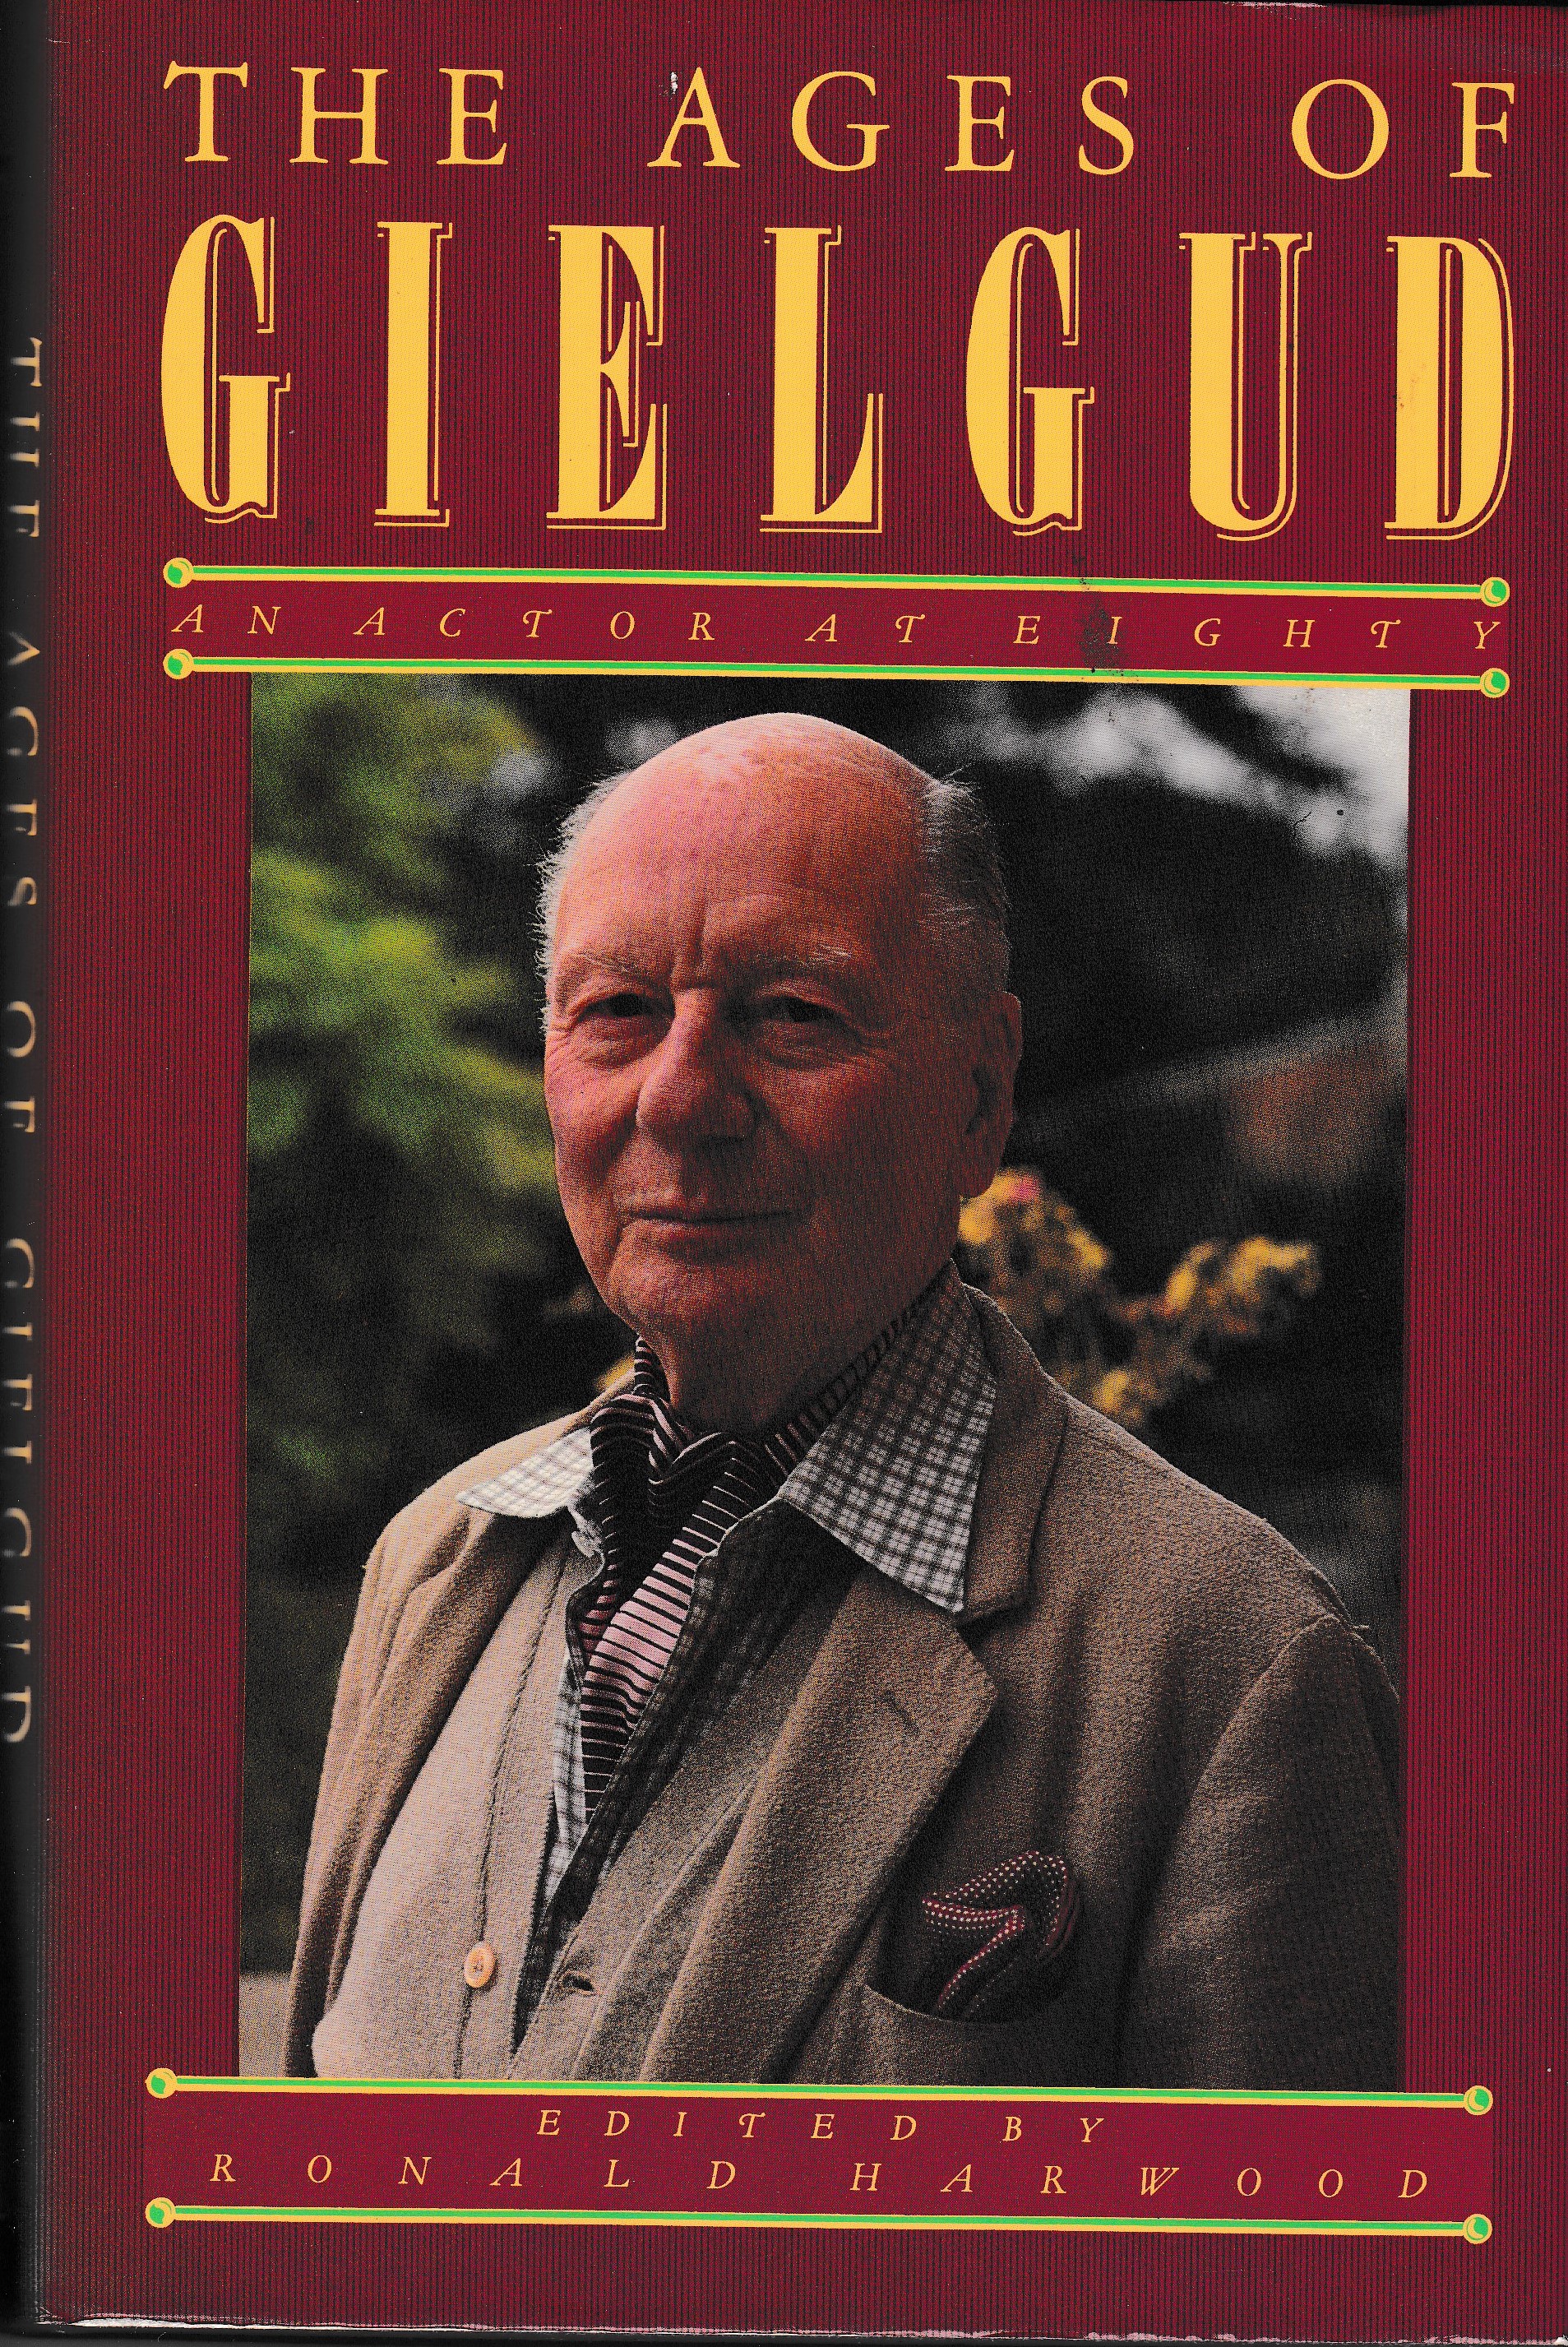 The Ages of Gielgud - An Actor At Eighty - Harwood, Ronald (ed.)